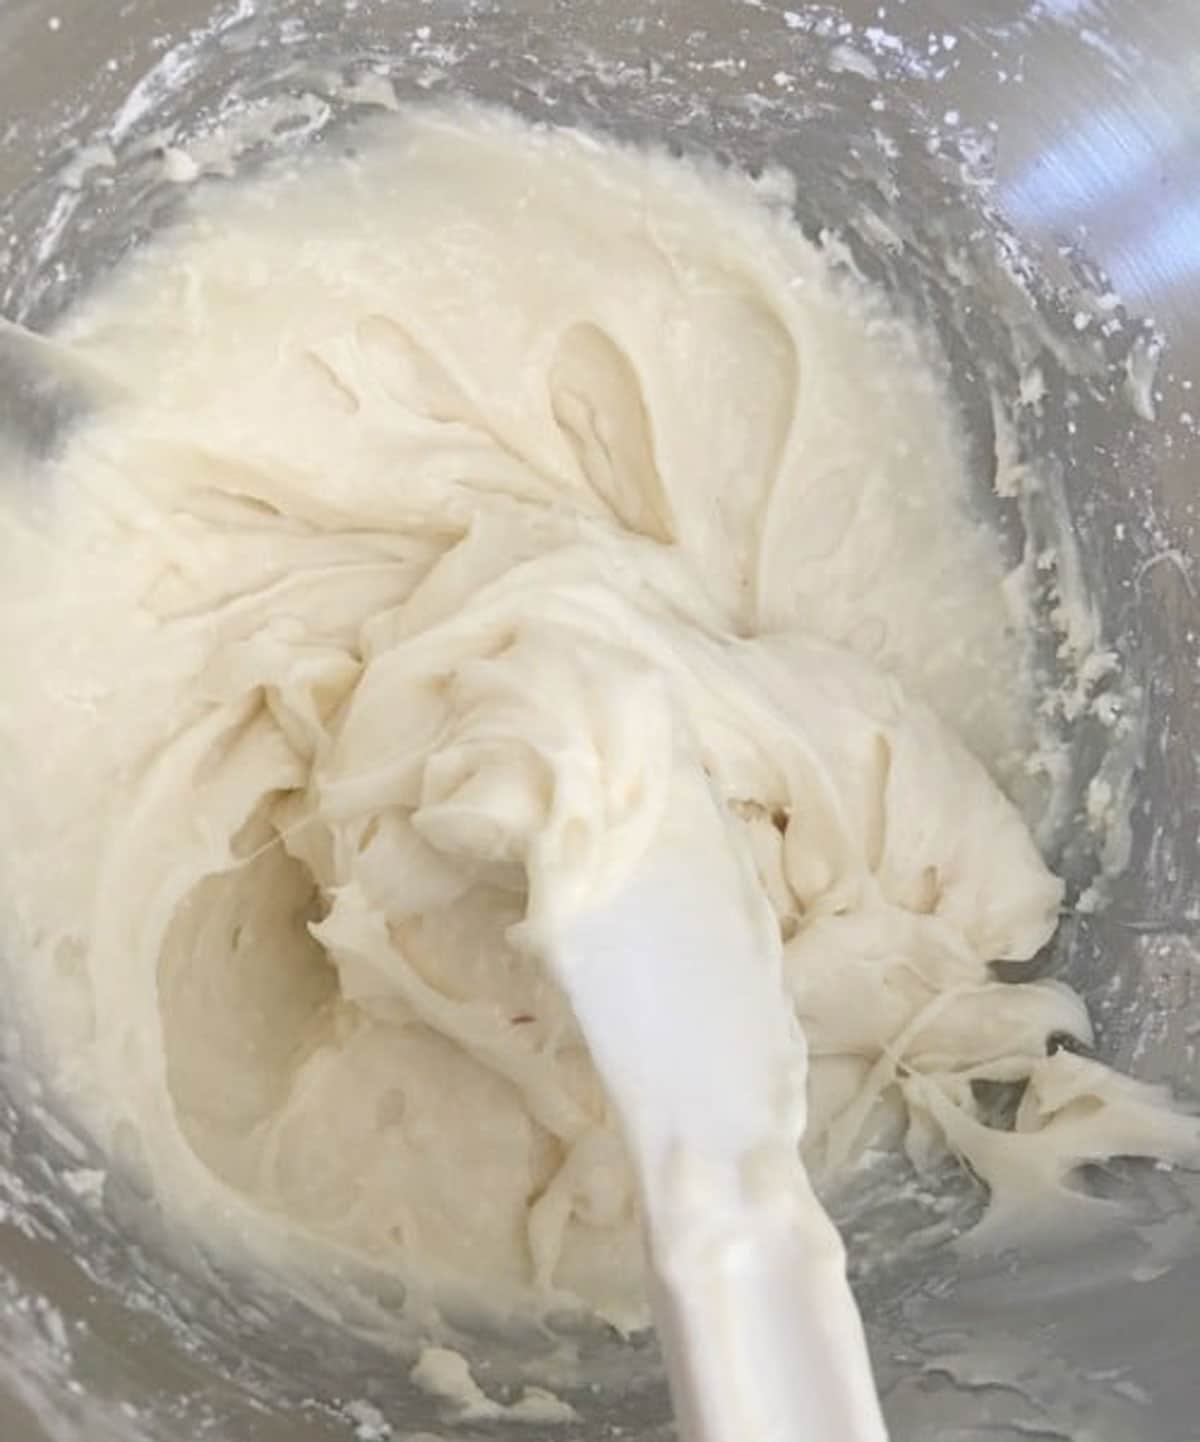 Whipped cream cheese frosting in a bowl.